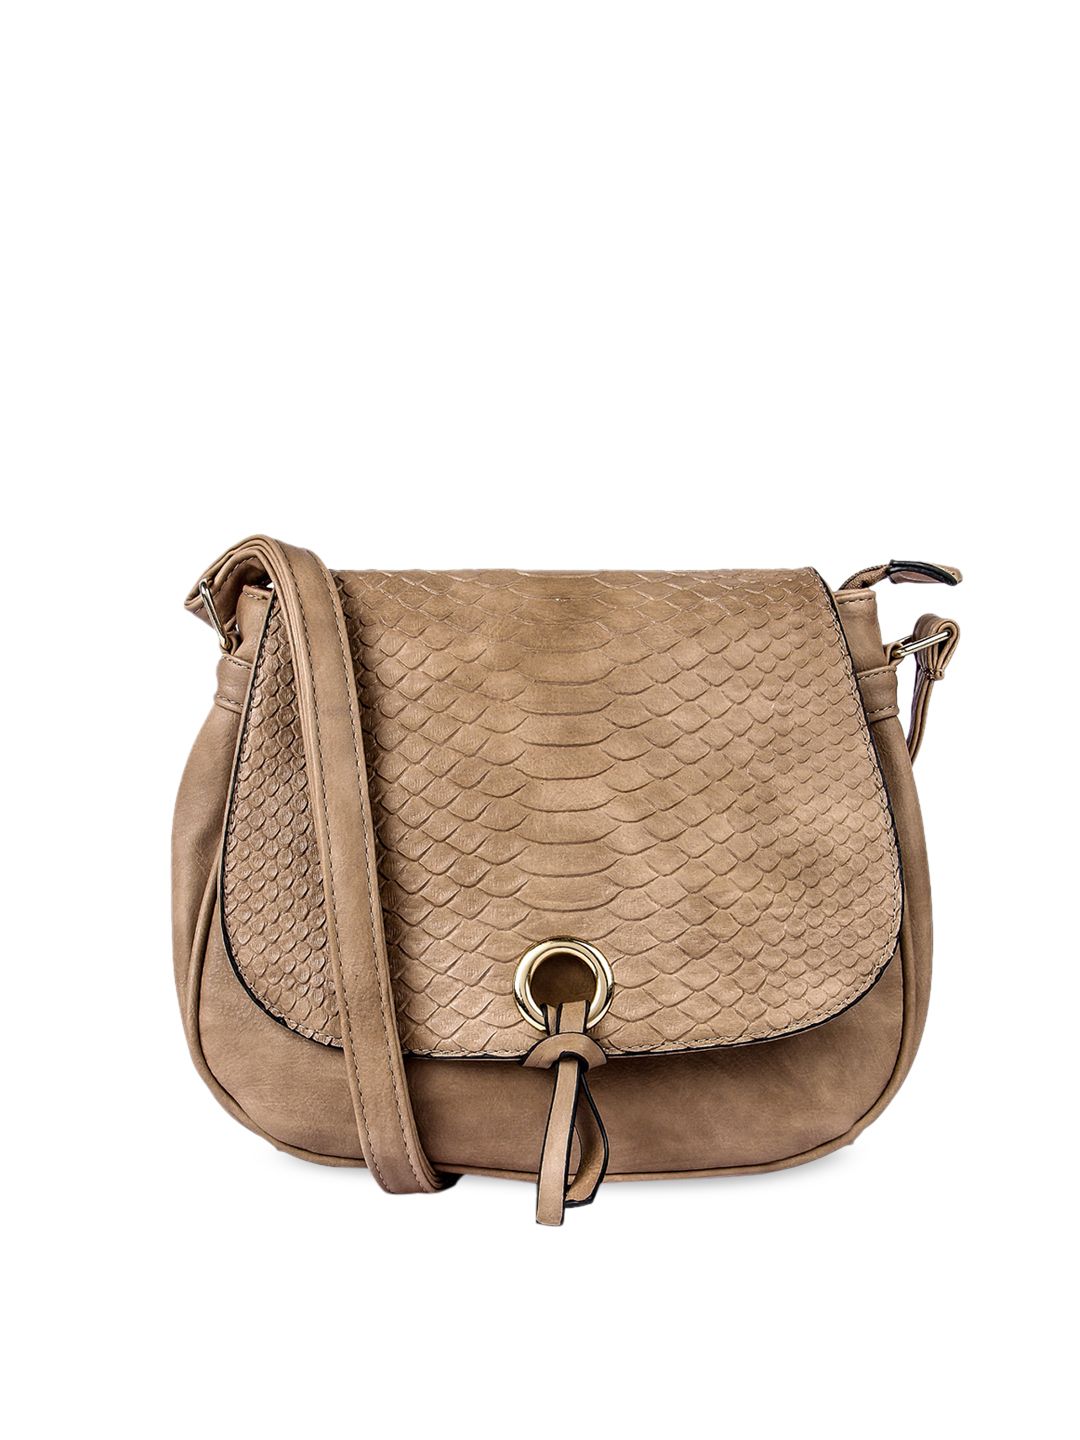 KLEIO Copper-Toned Textured PU Structured Sling Bag Price in India